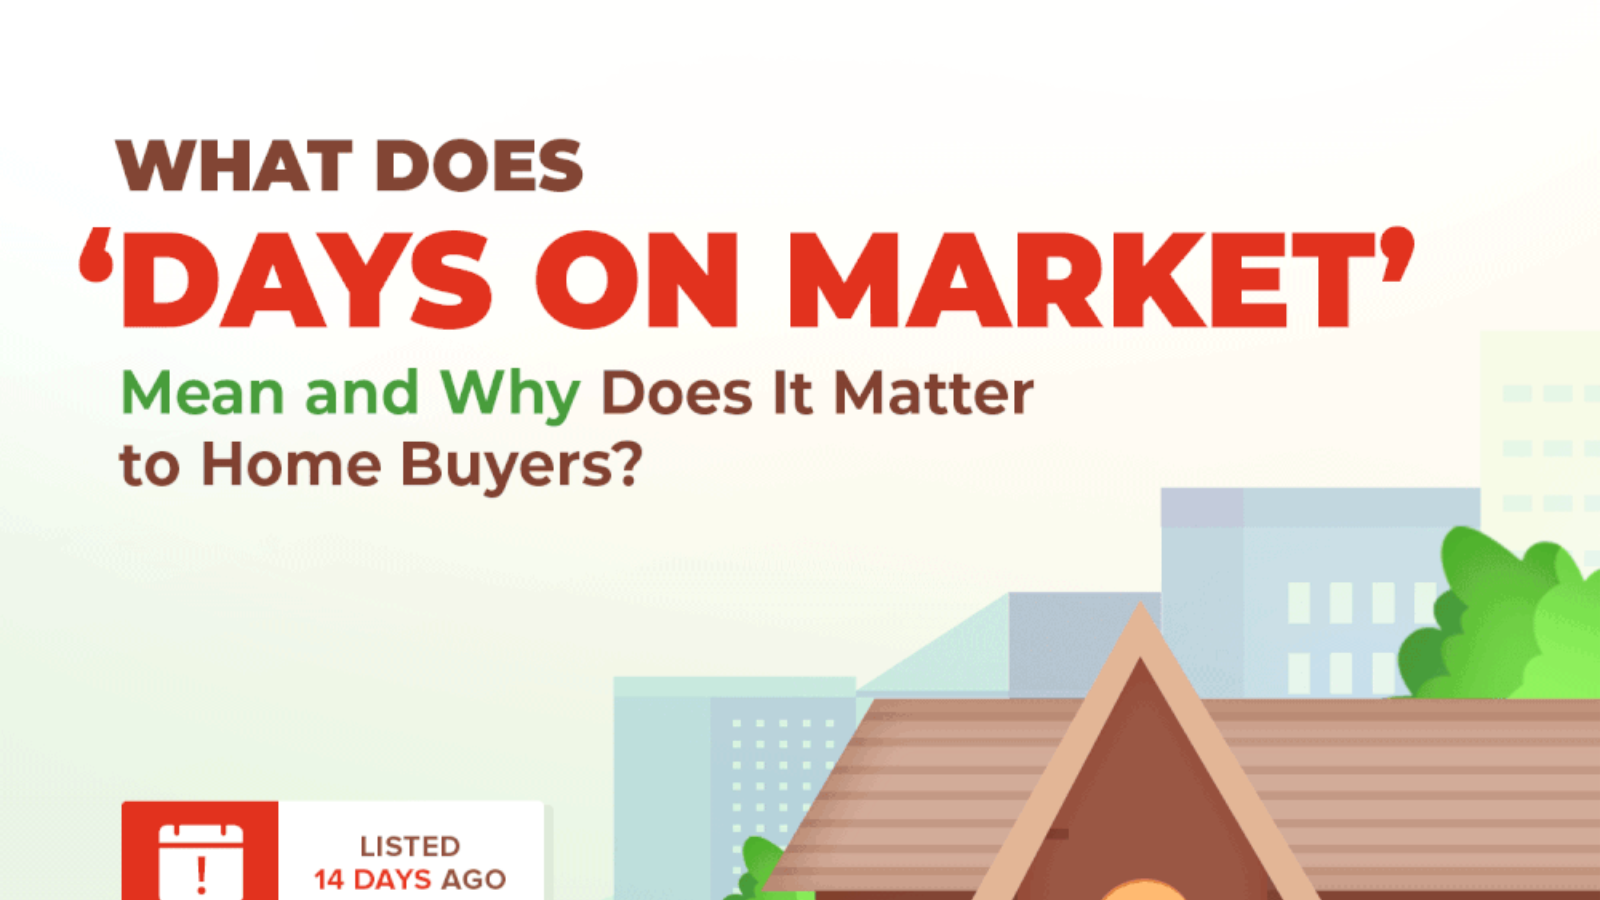 What Does ‘Days on Market' Mean and Why Does It Matter to Home Buyers?